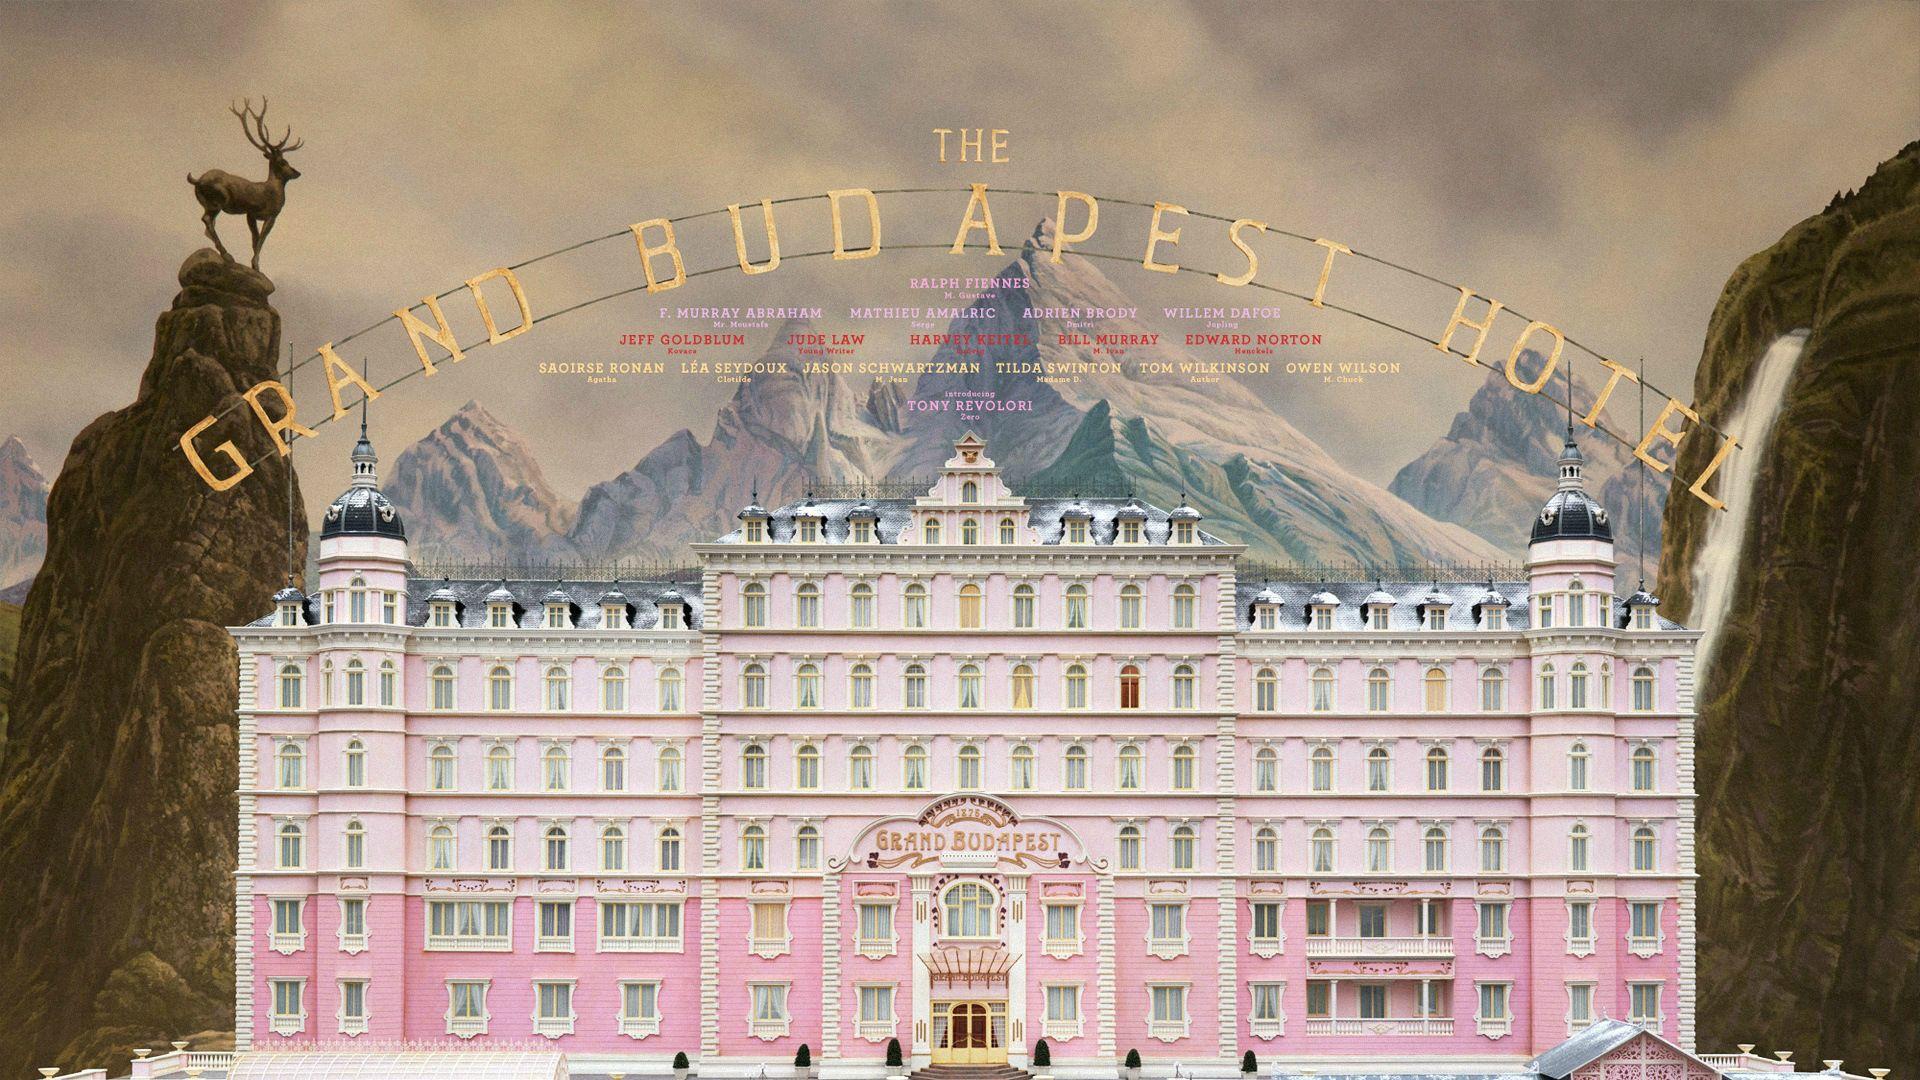 Wes Anderson. All great films